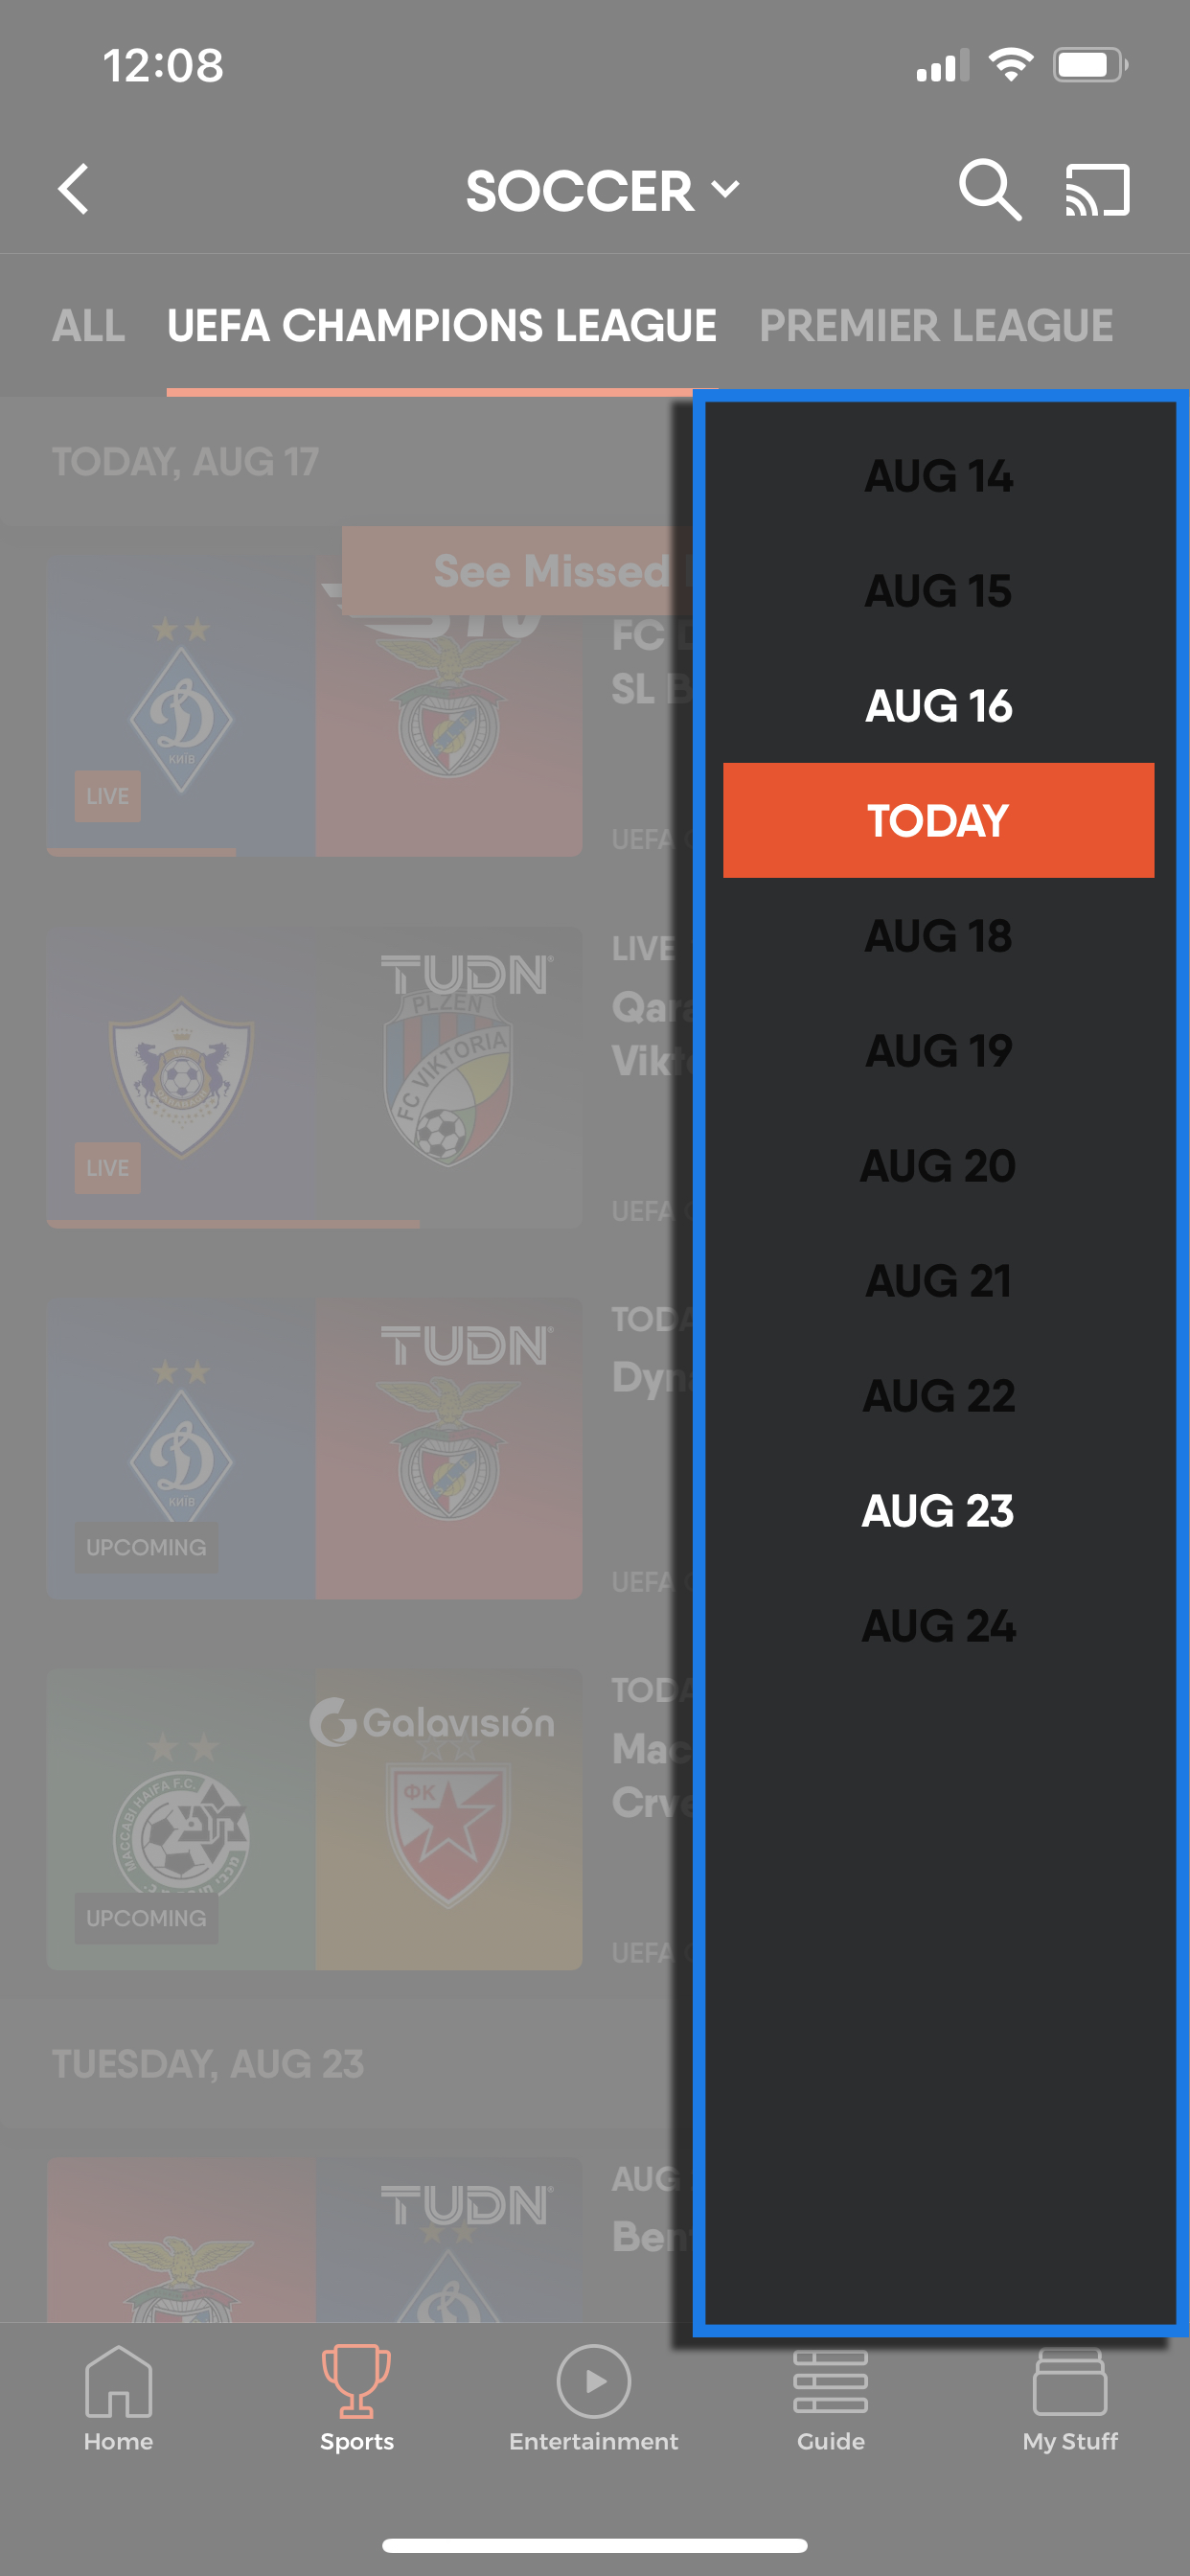 Date selection pop-up for previously-aired events on the FuboTV app for mobile devices; greyed-out dates mean there is no game available on that date